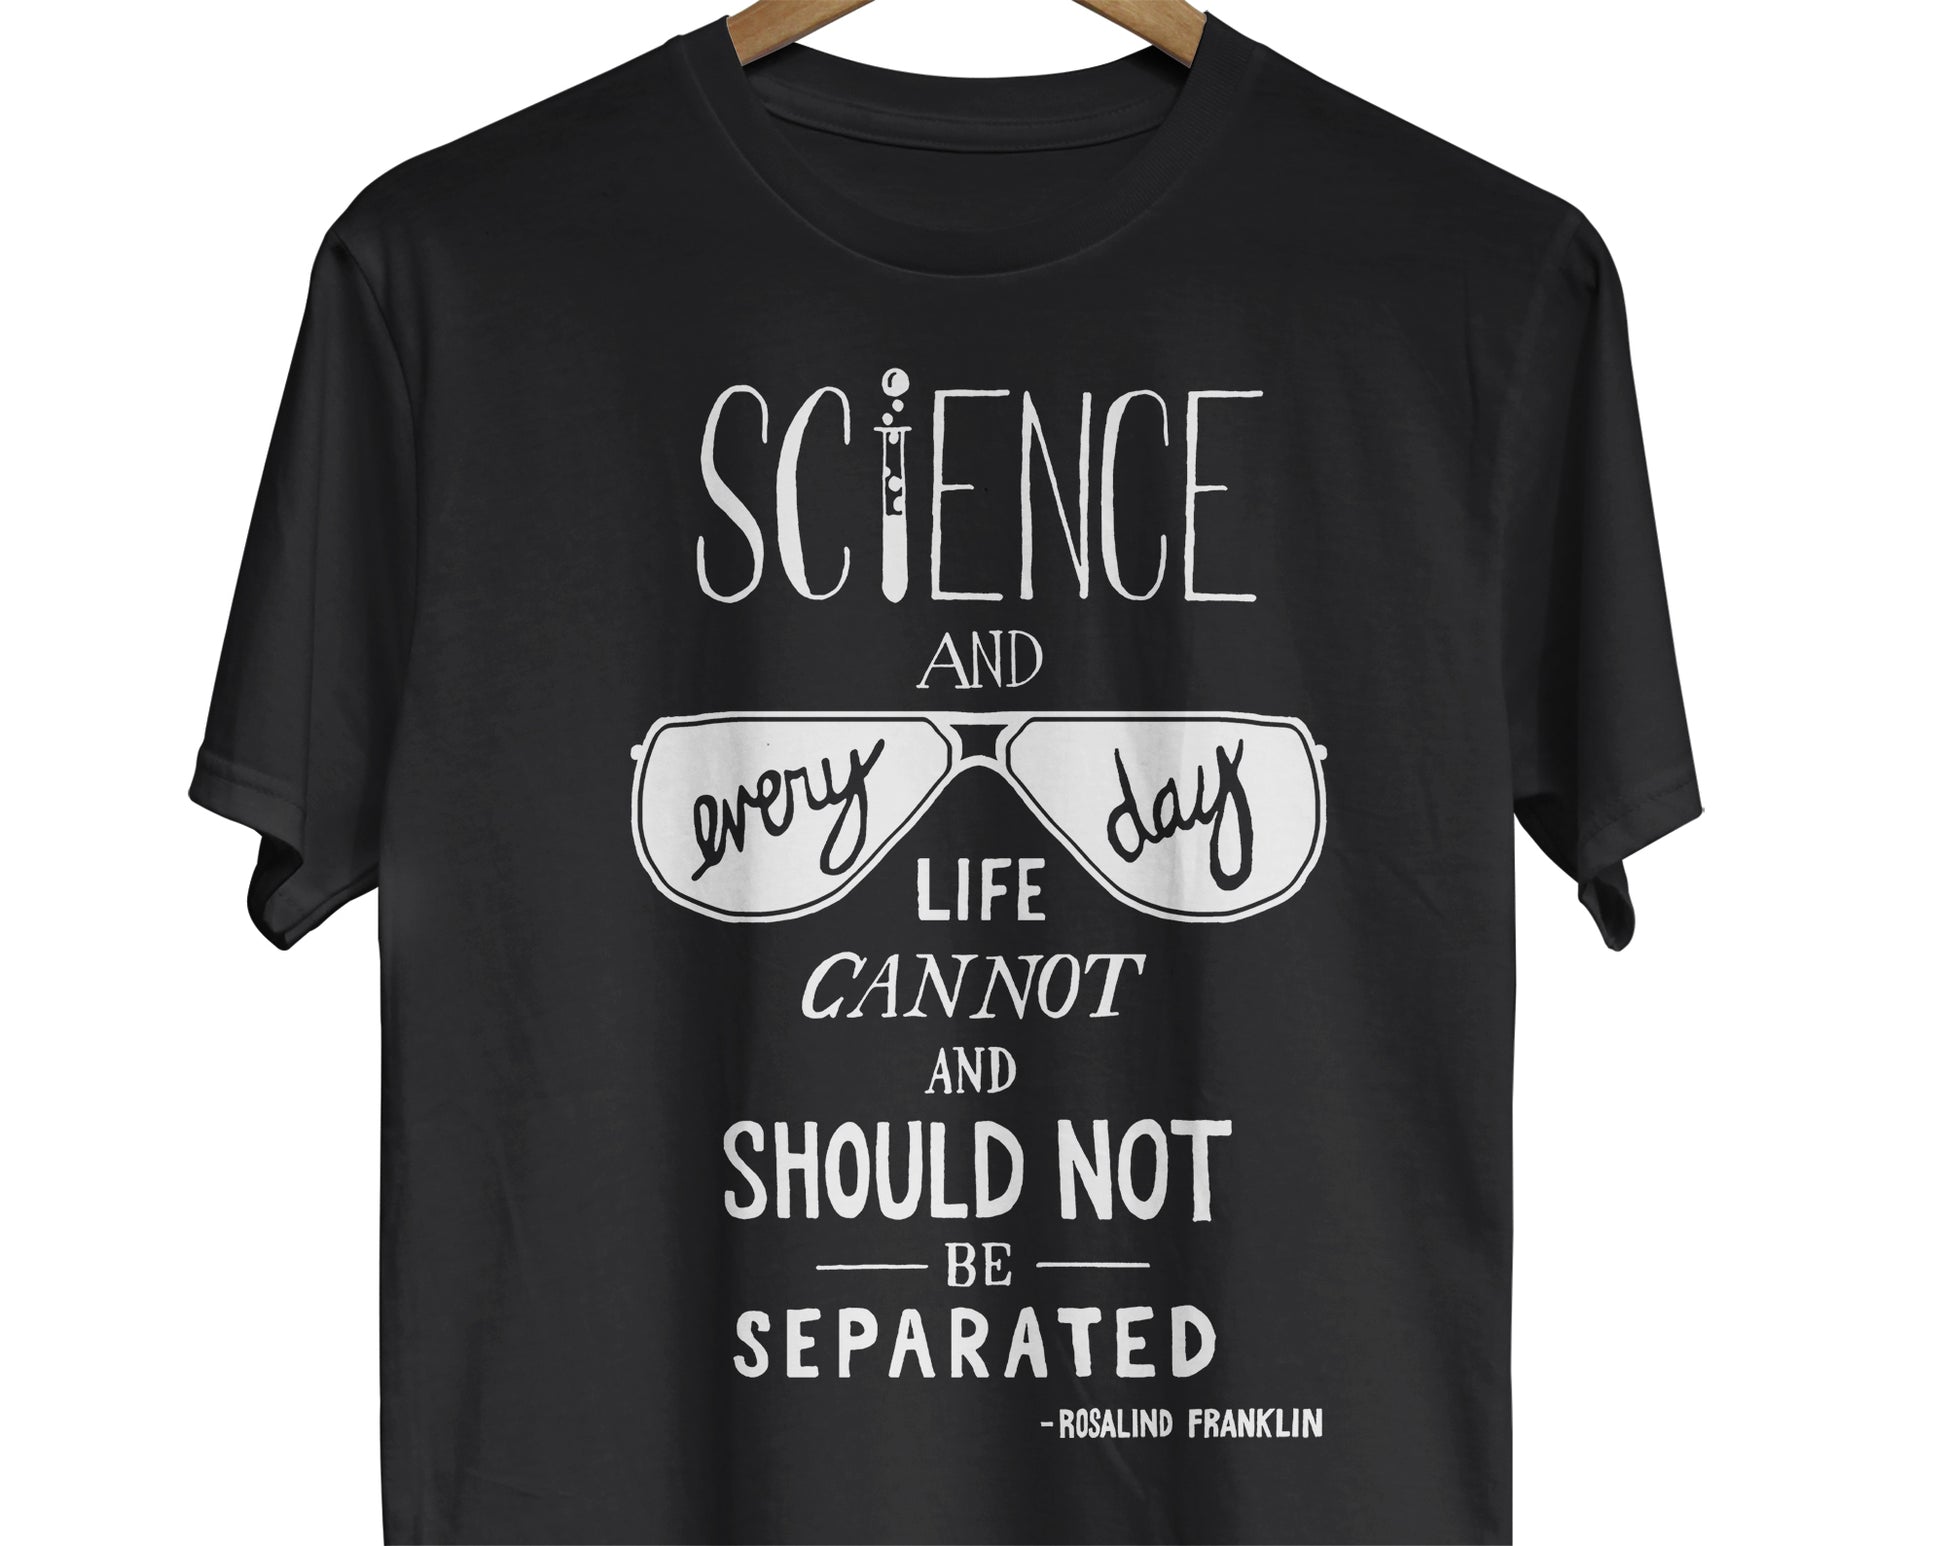 A science shirt featuring an illustrated, hand-lettered quote by Rosalind Franklin that reads, "Science and everyday life cannot and should not be separated."